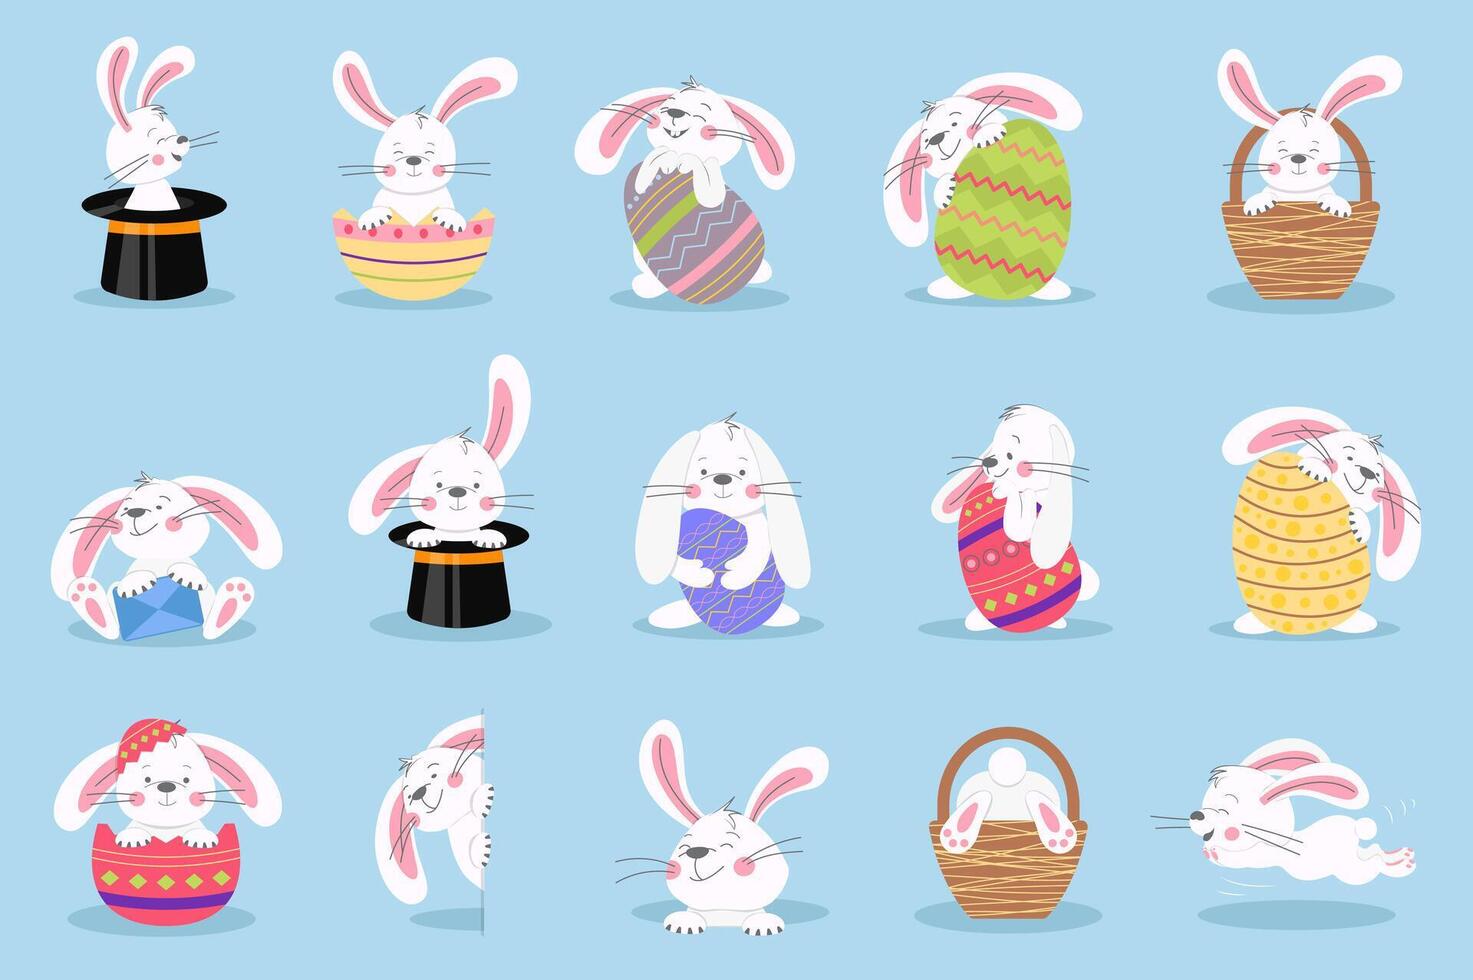 Easter bunny set graphic elements in flat design. Bundle of cute white rabbits holding colorful eggs with different festive patterns, sit in black hats or baskets. Vector illustration isolated objects